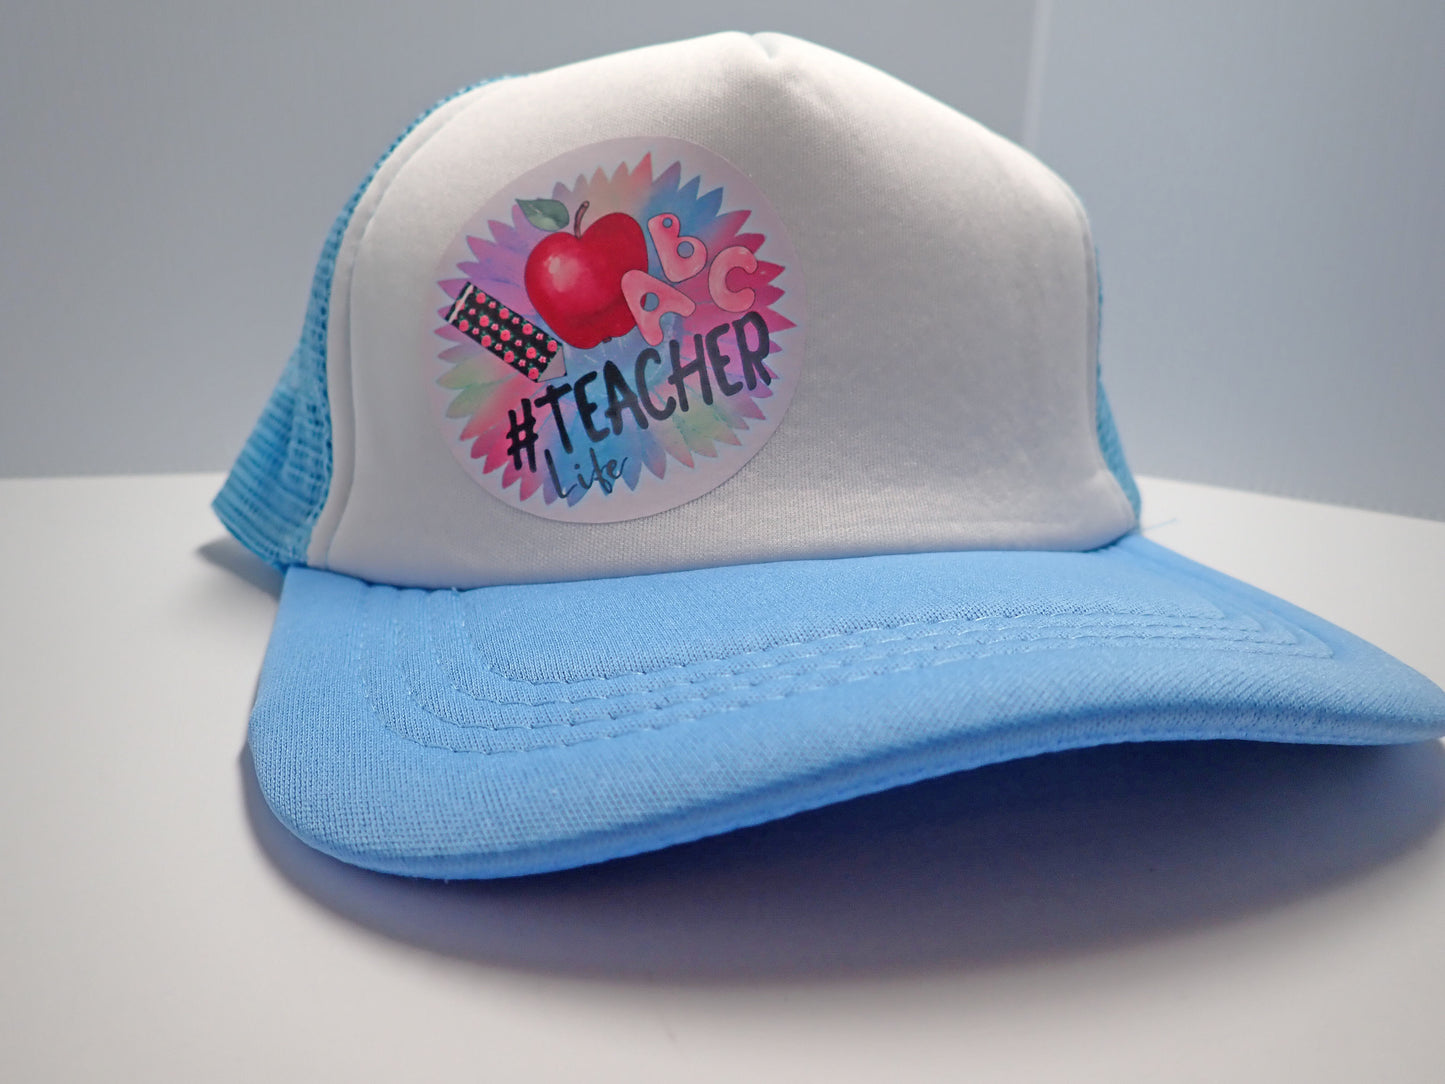 Ball cap, trucker cap, hat, blue, white, one size fits most, focal, gift